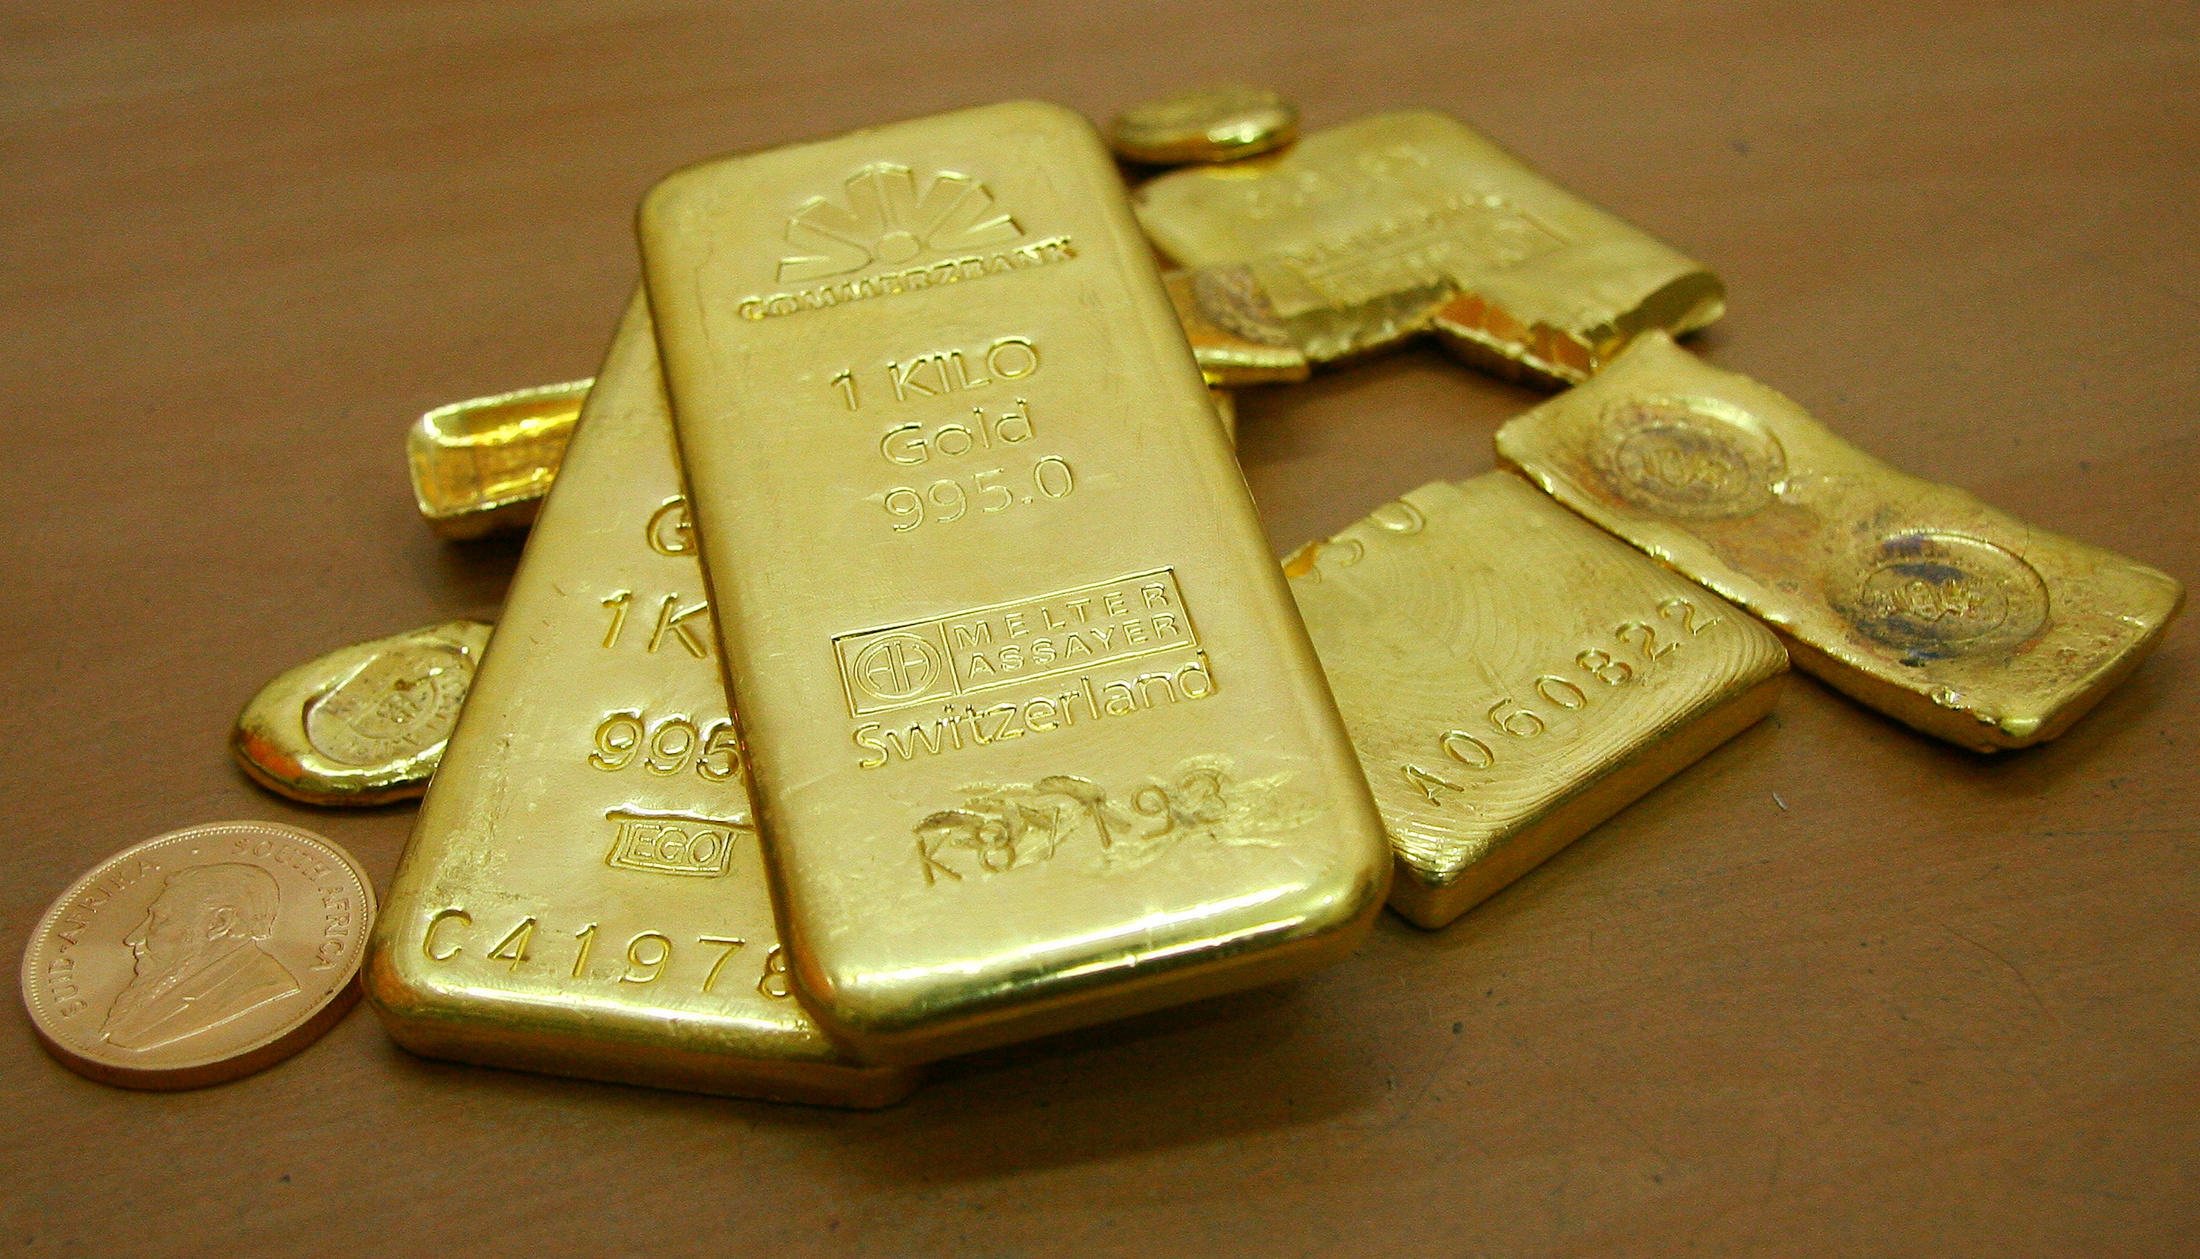 Gold bars are displayed at a gold jewelry shop in Chandigarh